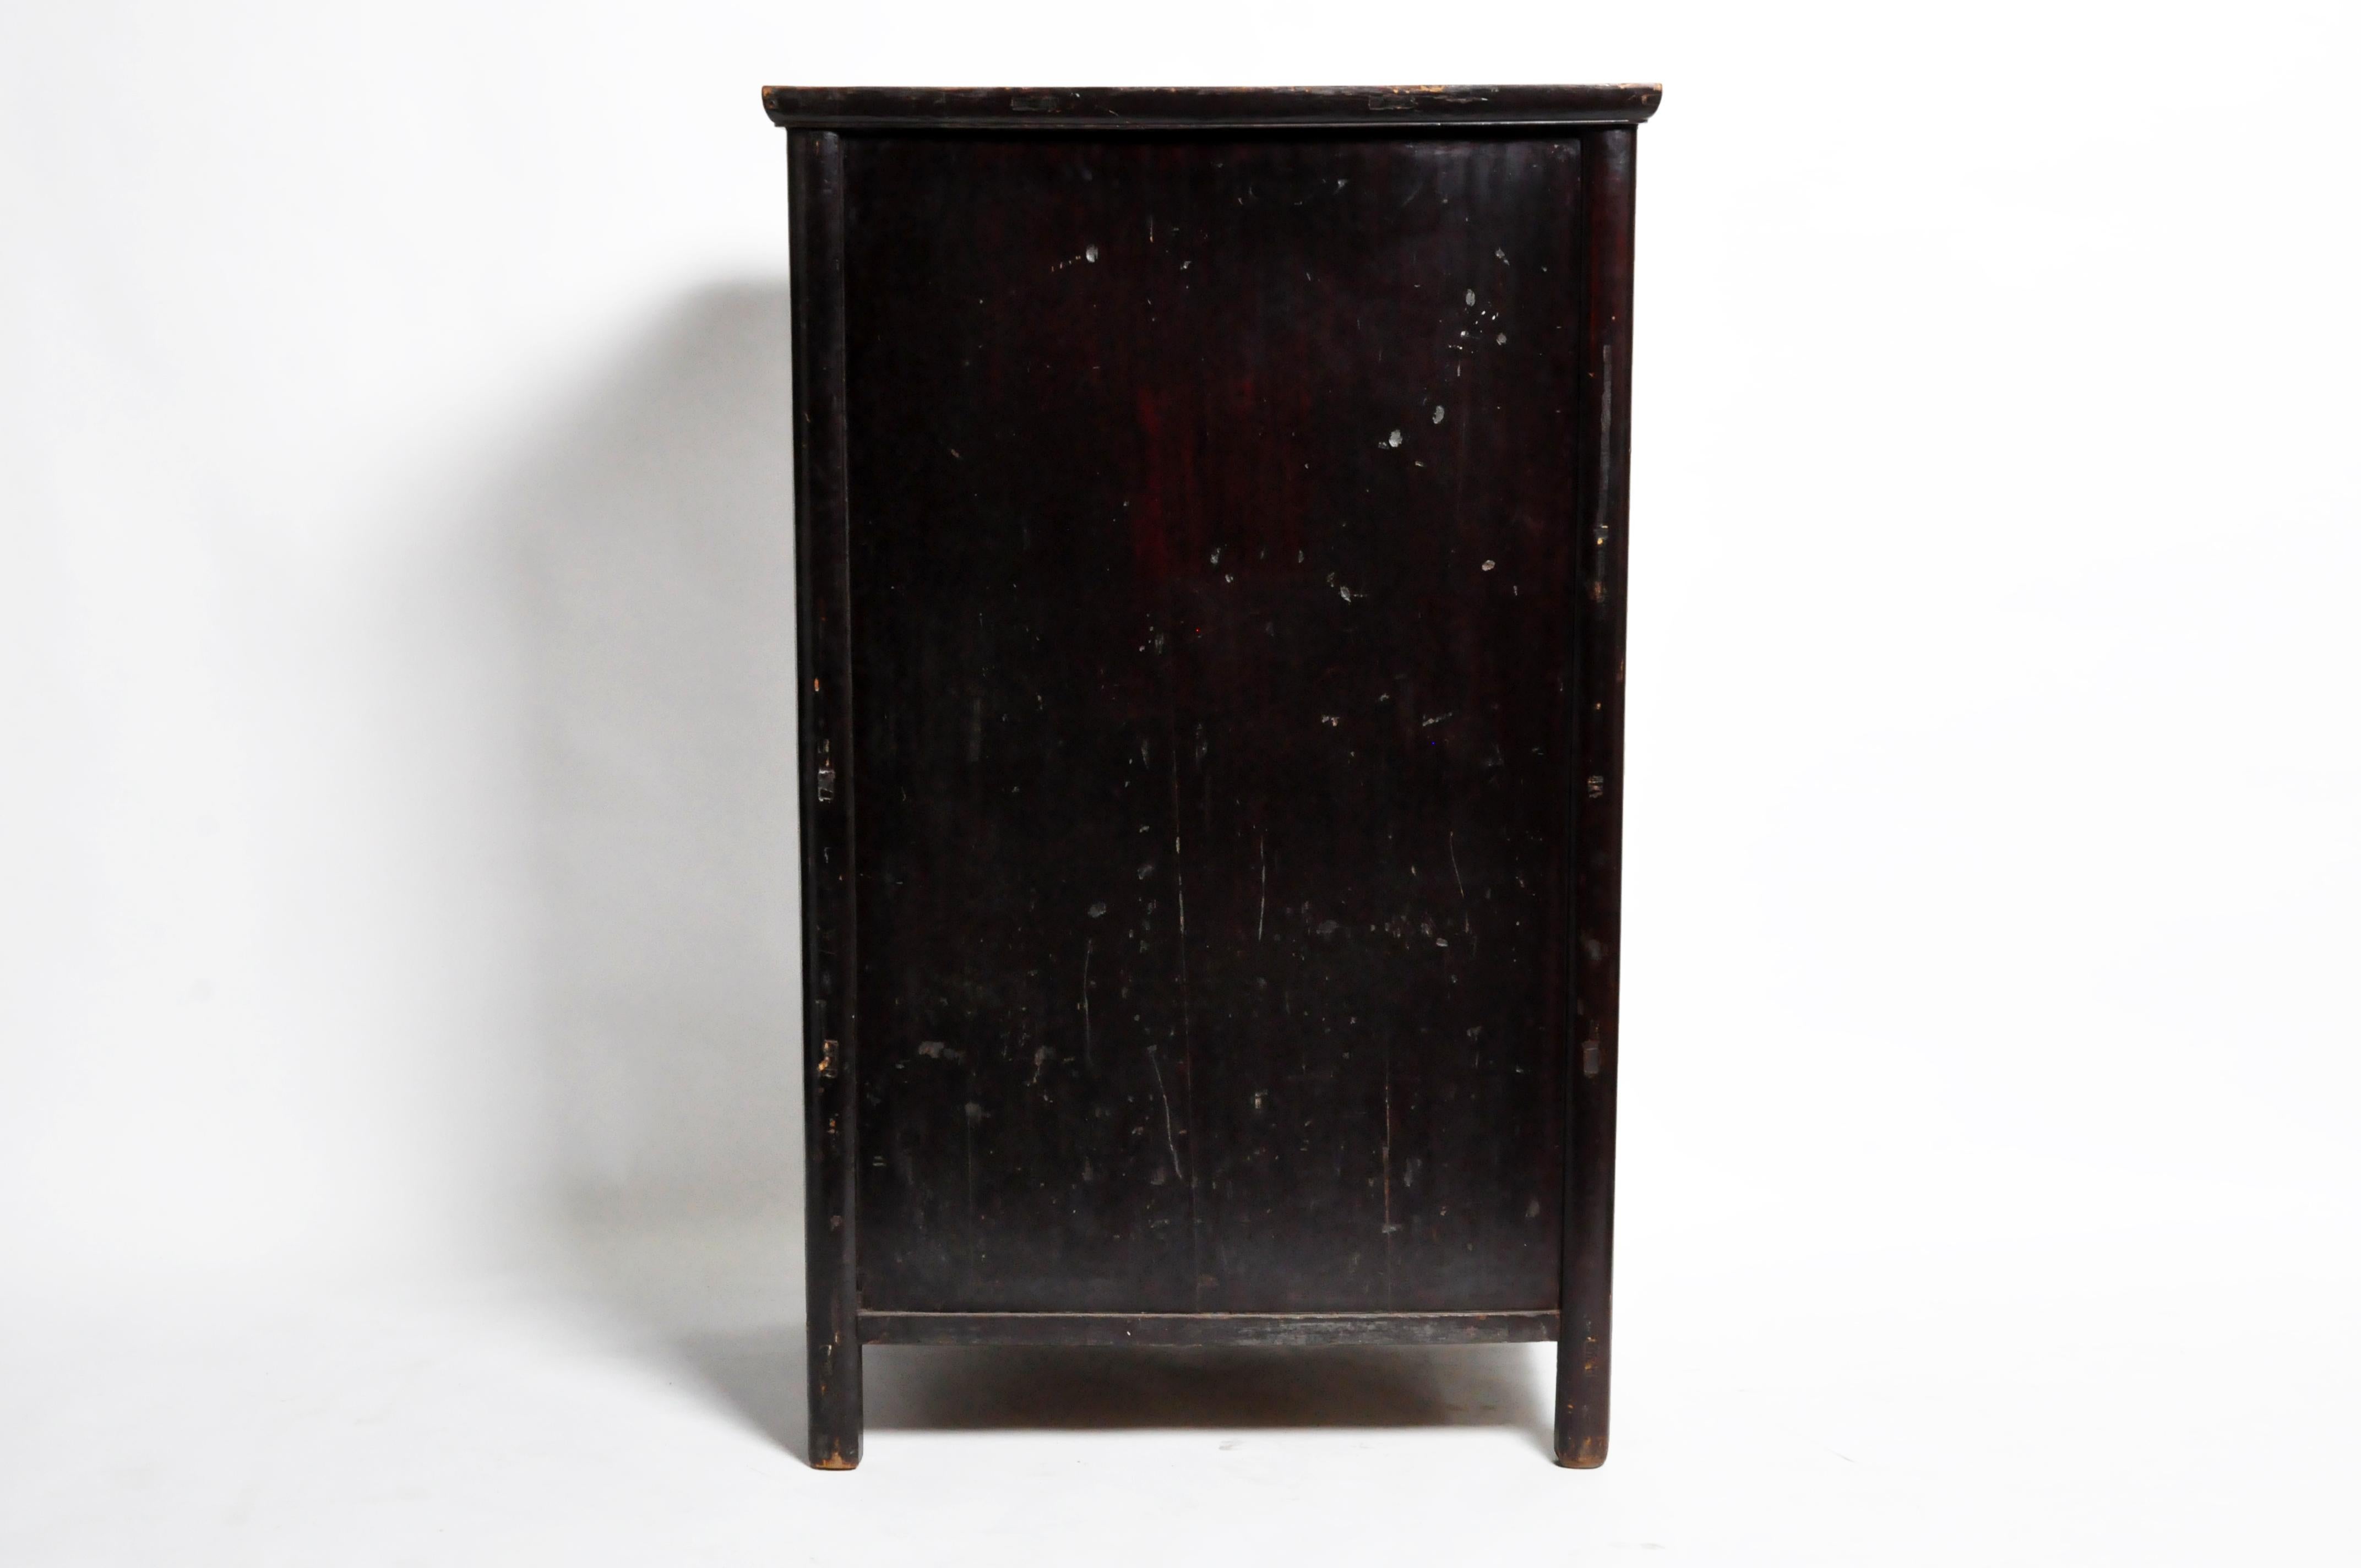 This compact armoire is comprised of beautiful clean lines; an asymmetrical overhanging top called a cabinet’s cap surmounts straight, convex legs and feet. A pair of doors, with moulded edges and metal lockplates, conceals a drawer-lined interior